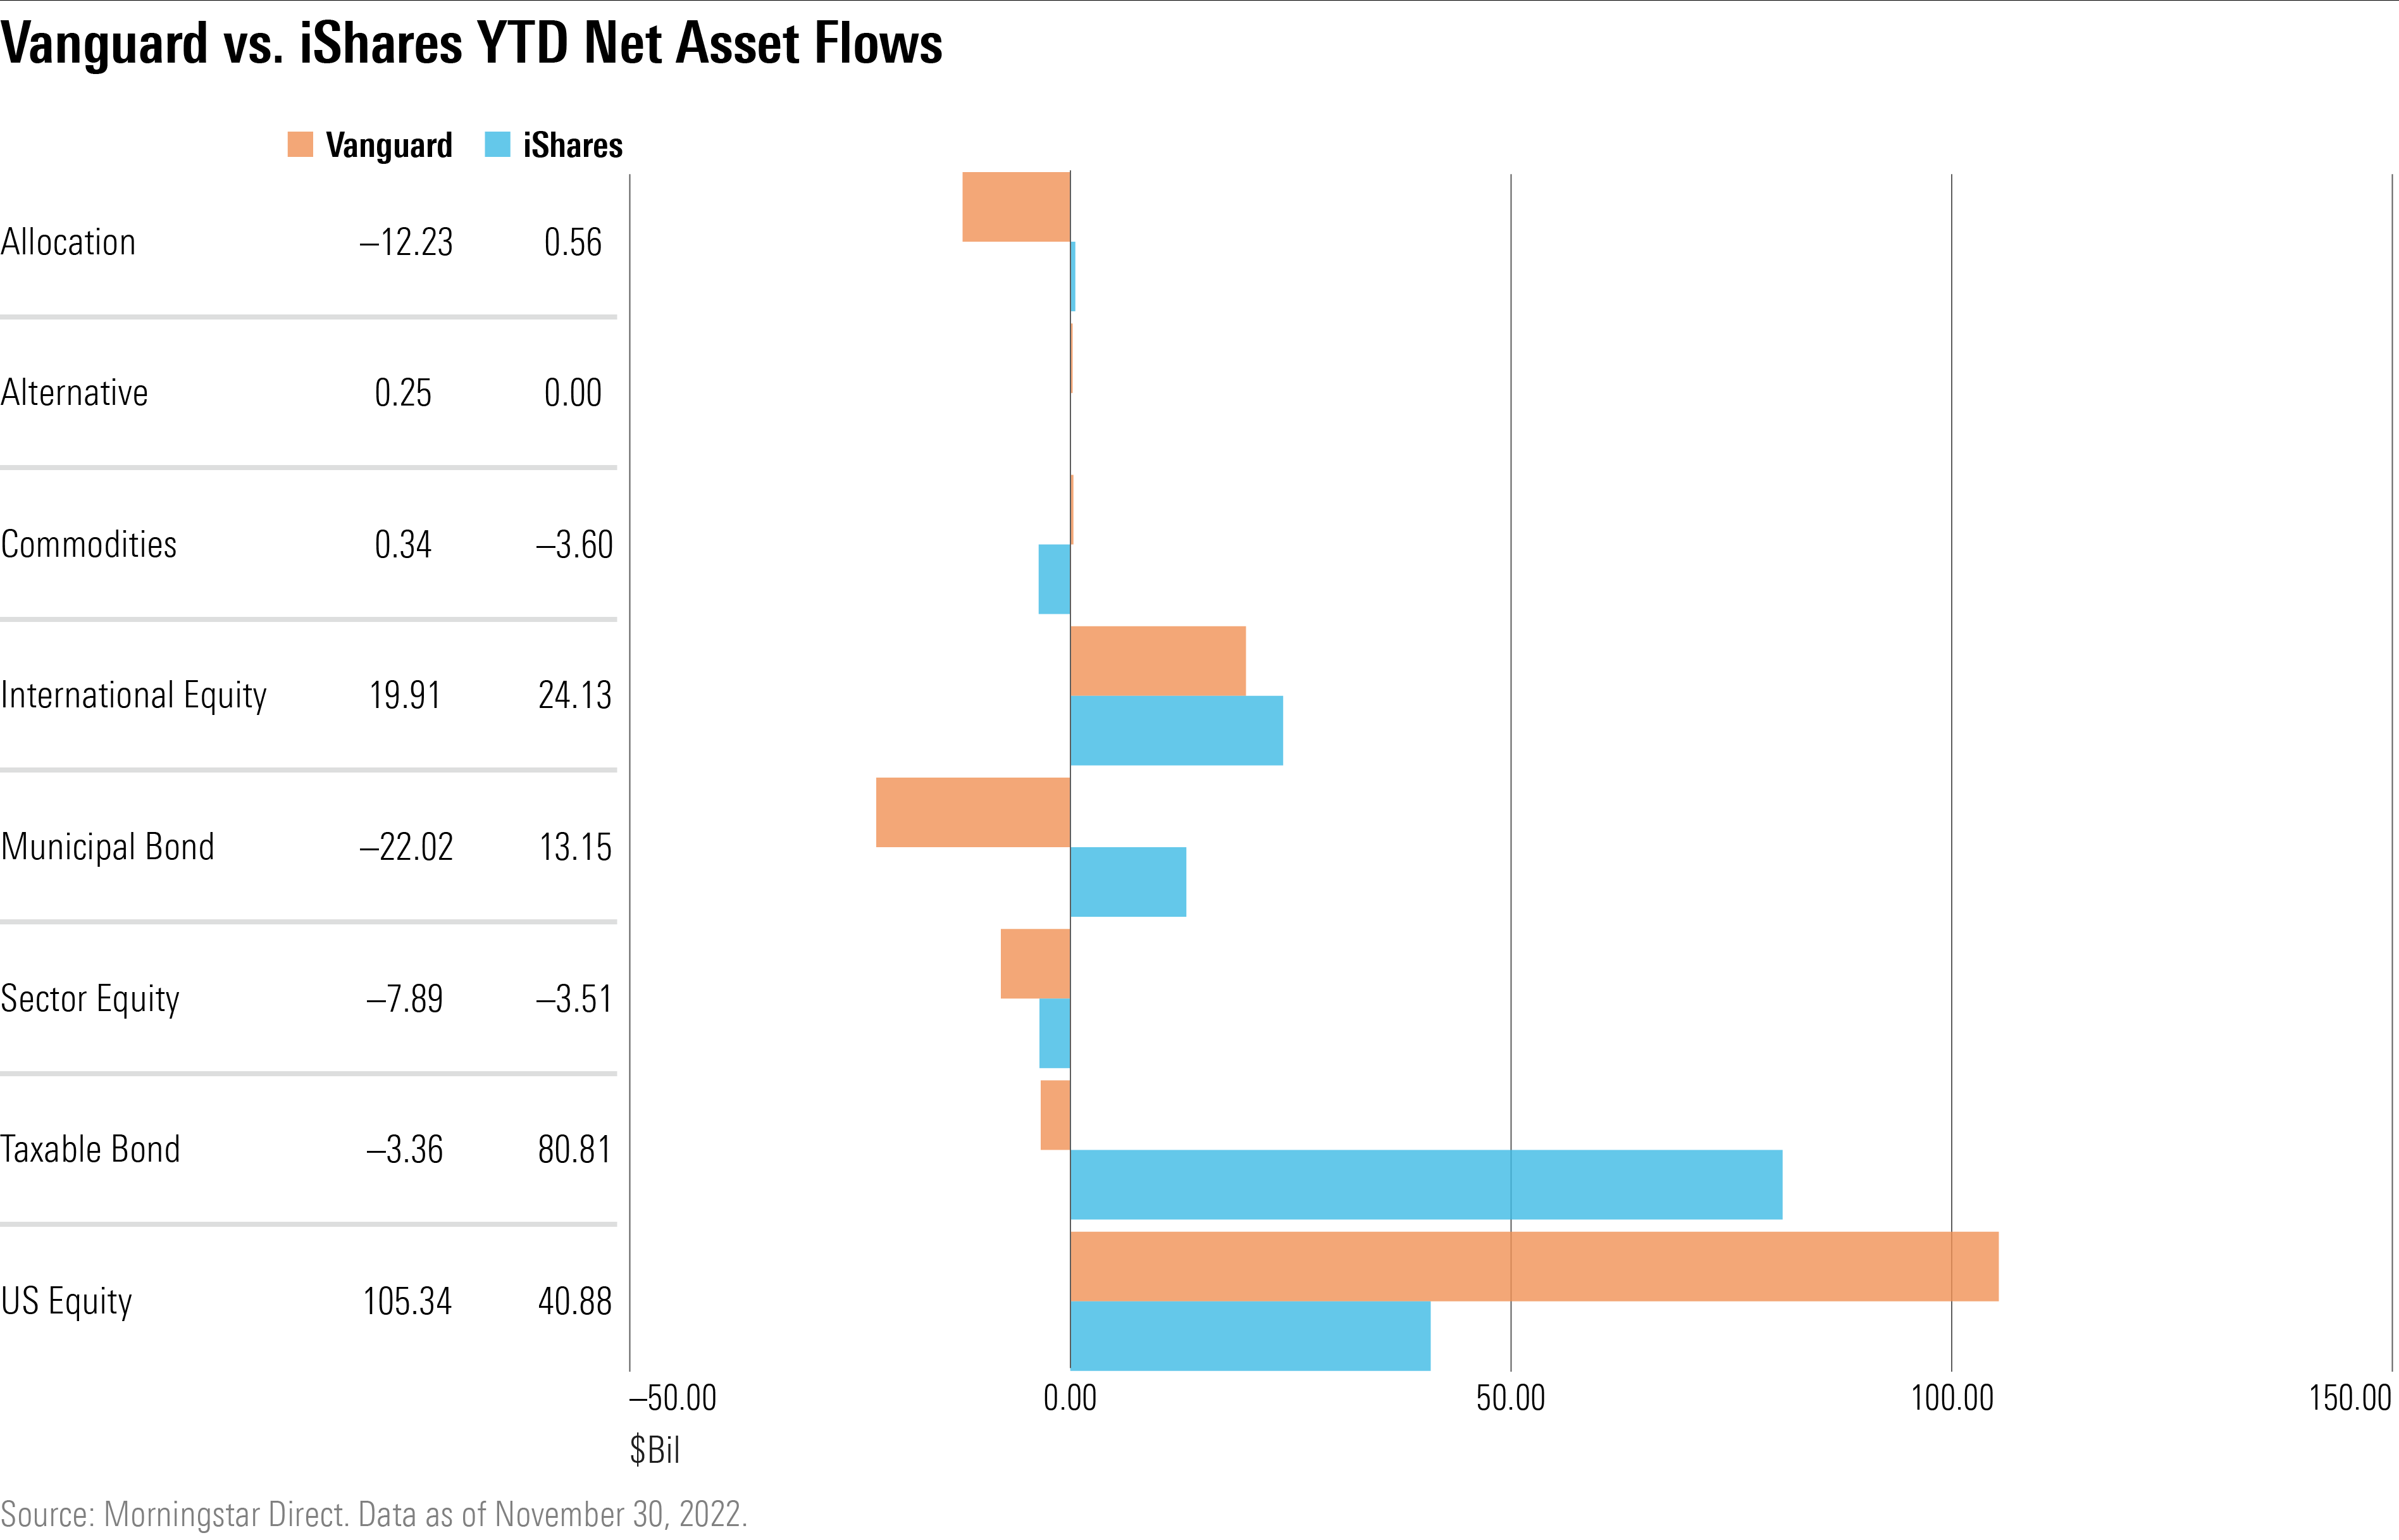 A bar chart showing Vanguard and iShares net asset flows across different fund categories